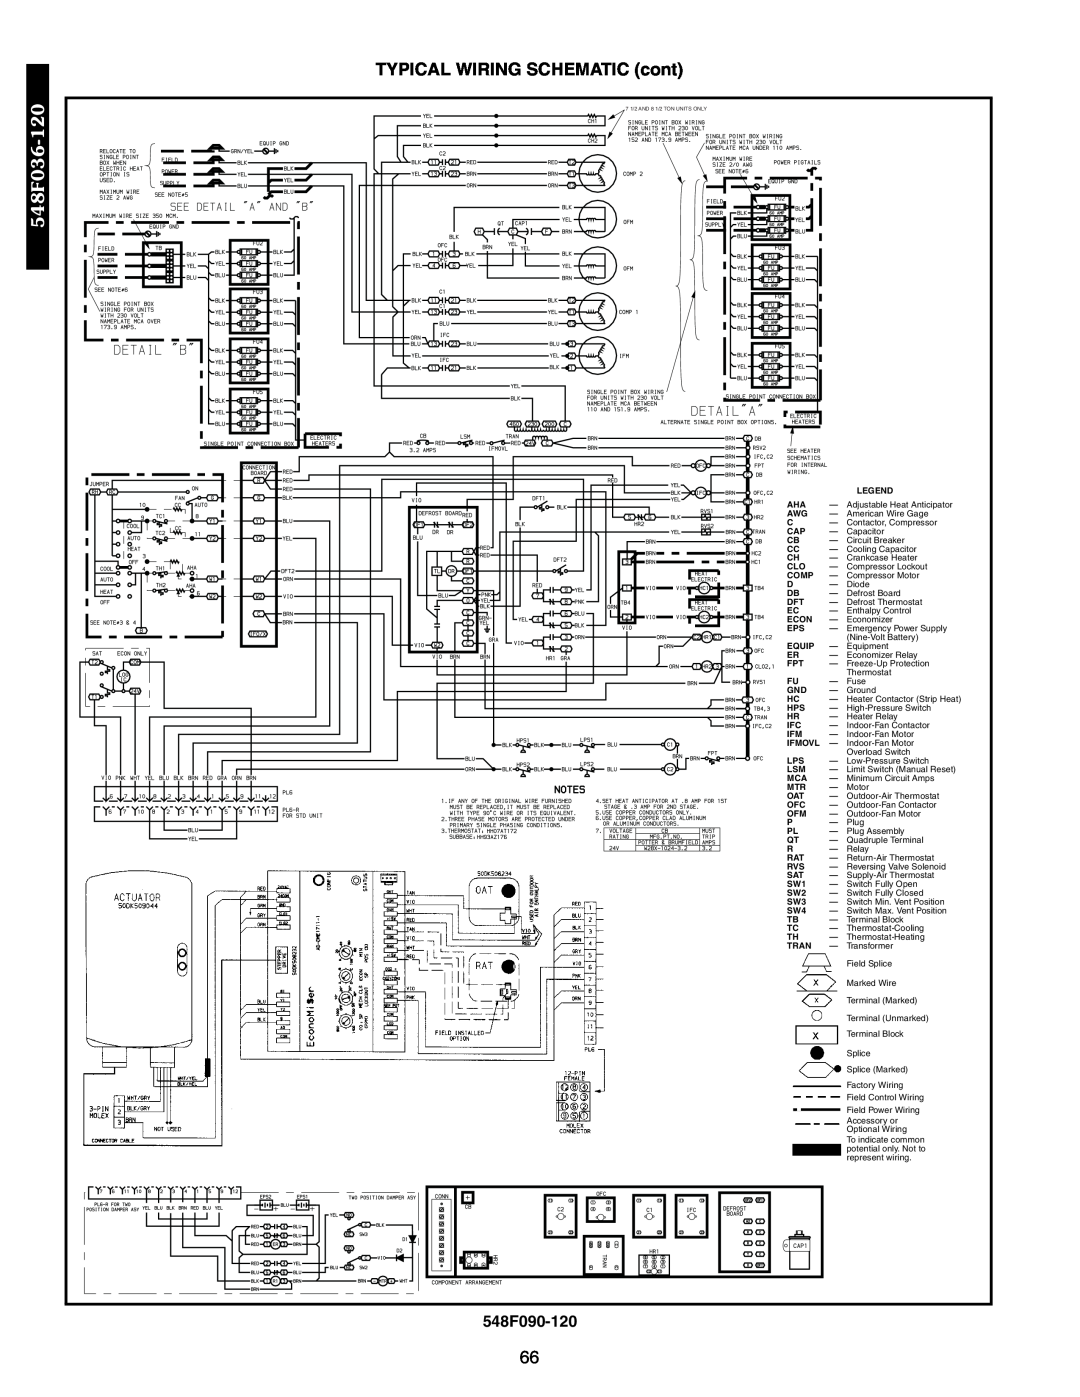 Bryant 542J, 549B manual 120-548F036, TYPICAL WIRING SCHEMATIC cont, 548F090-120 